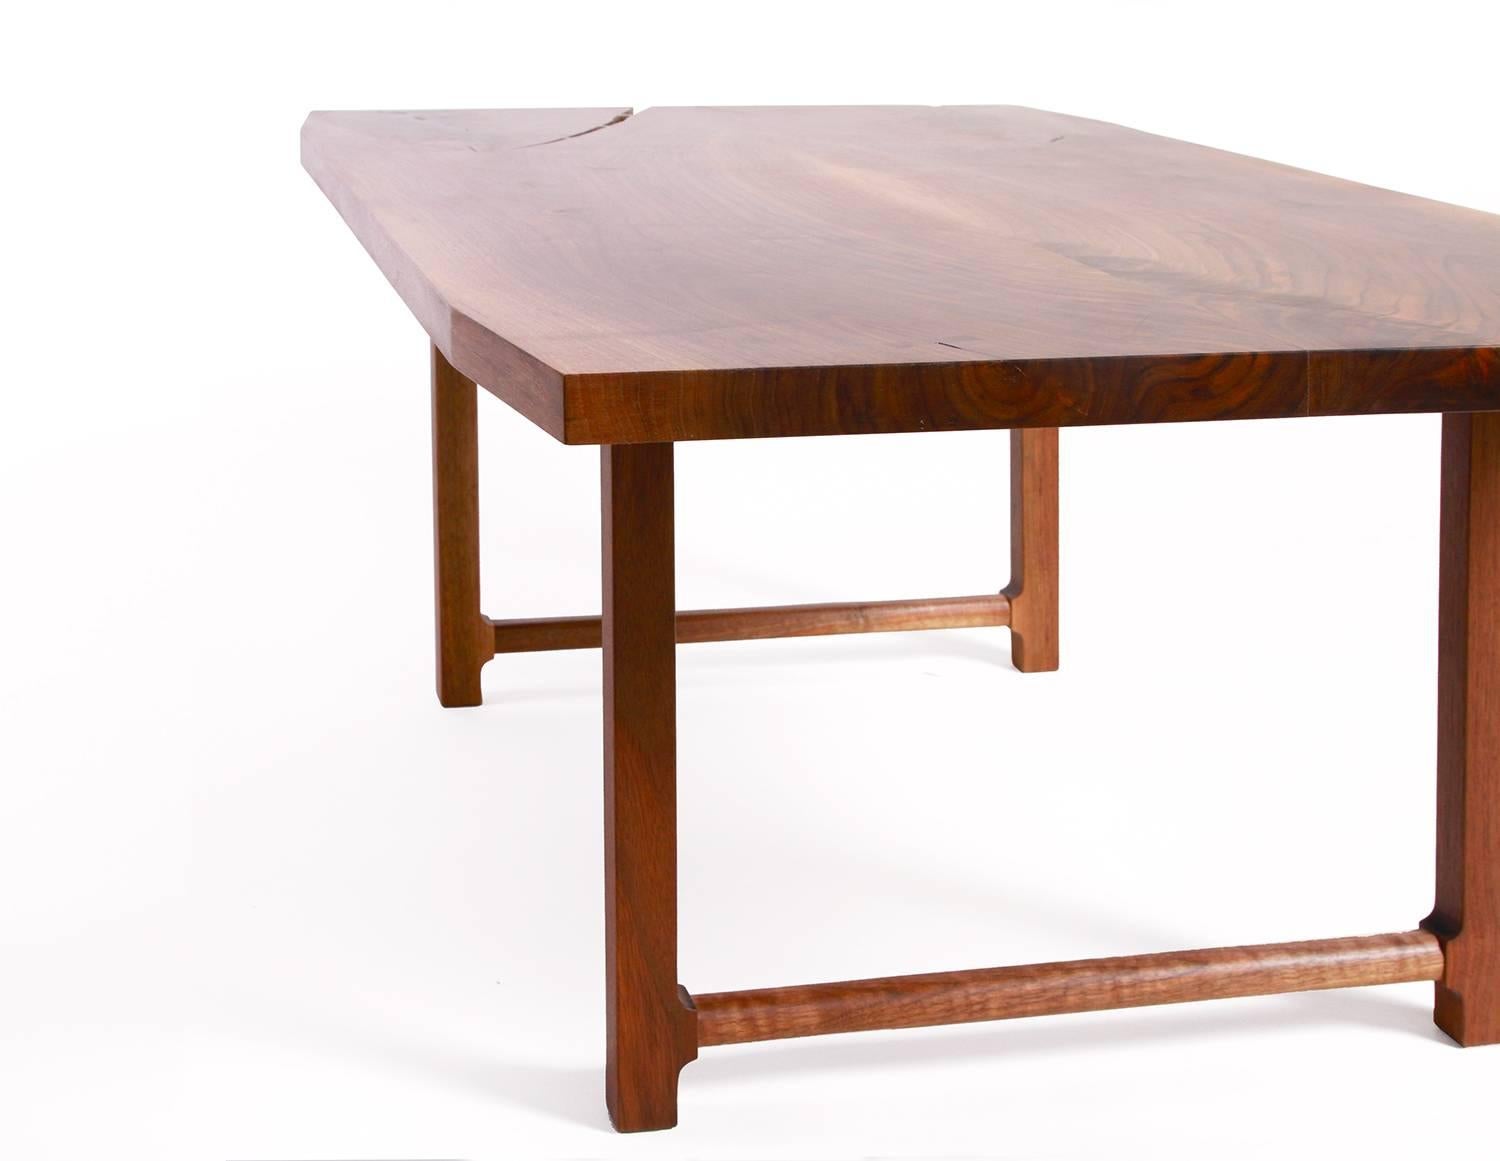 New York Heartwoods' contemporary black walnut Highland Coffee Table features a carefully bookmatched top with faceted corners, butterfly key inlays, and a hand-shaped Mid-Century design inspired base.

Each table is made with sustainable wood